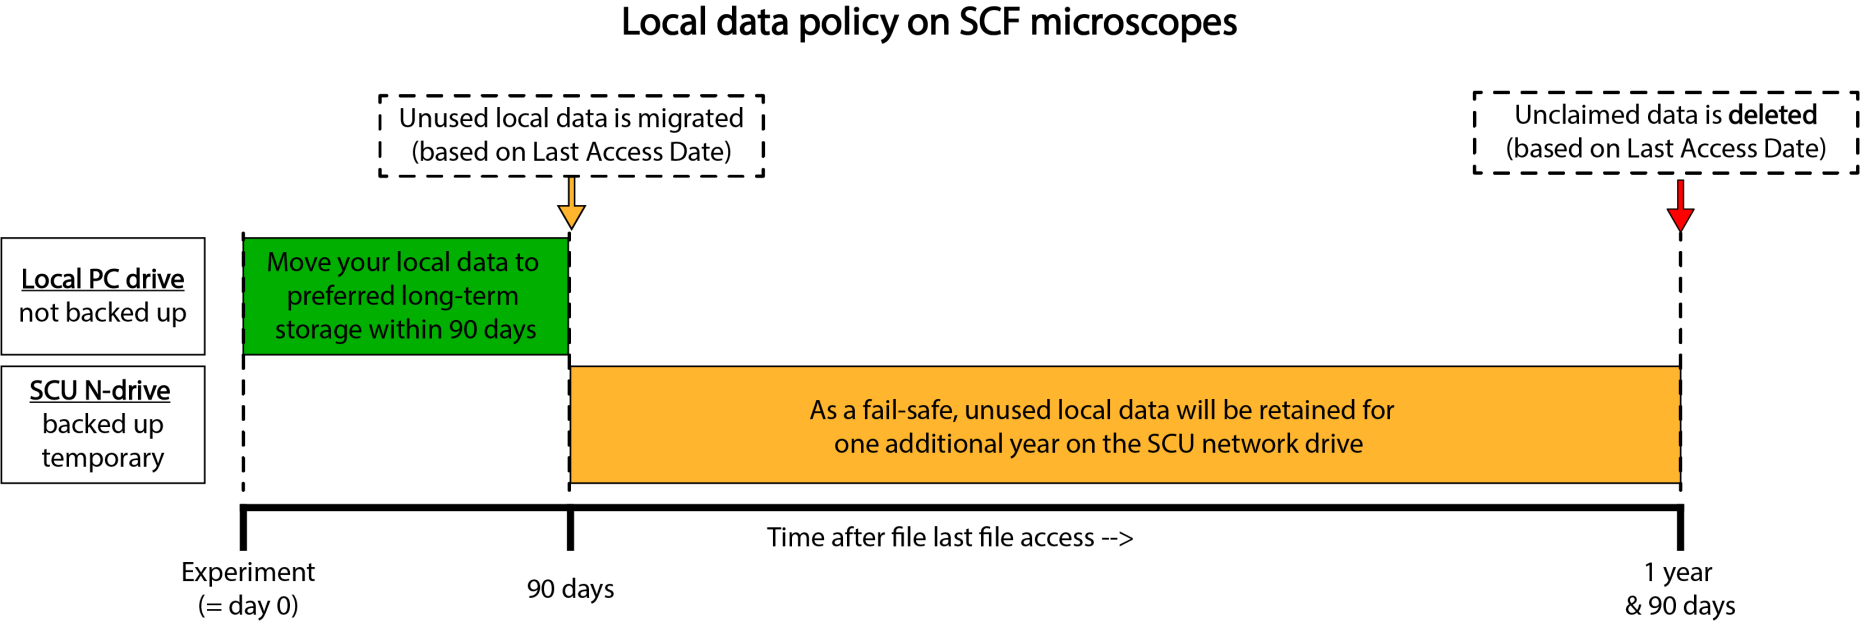 Schematic depiction of the SCF local data policy